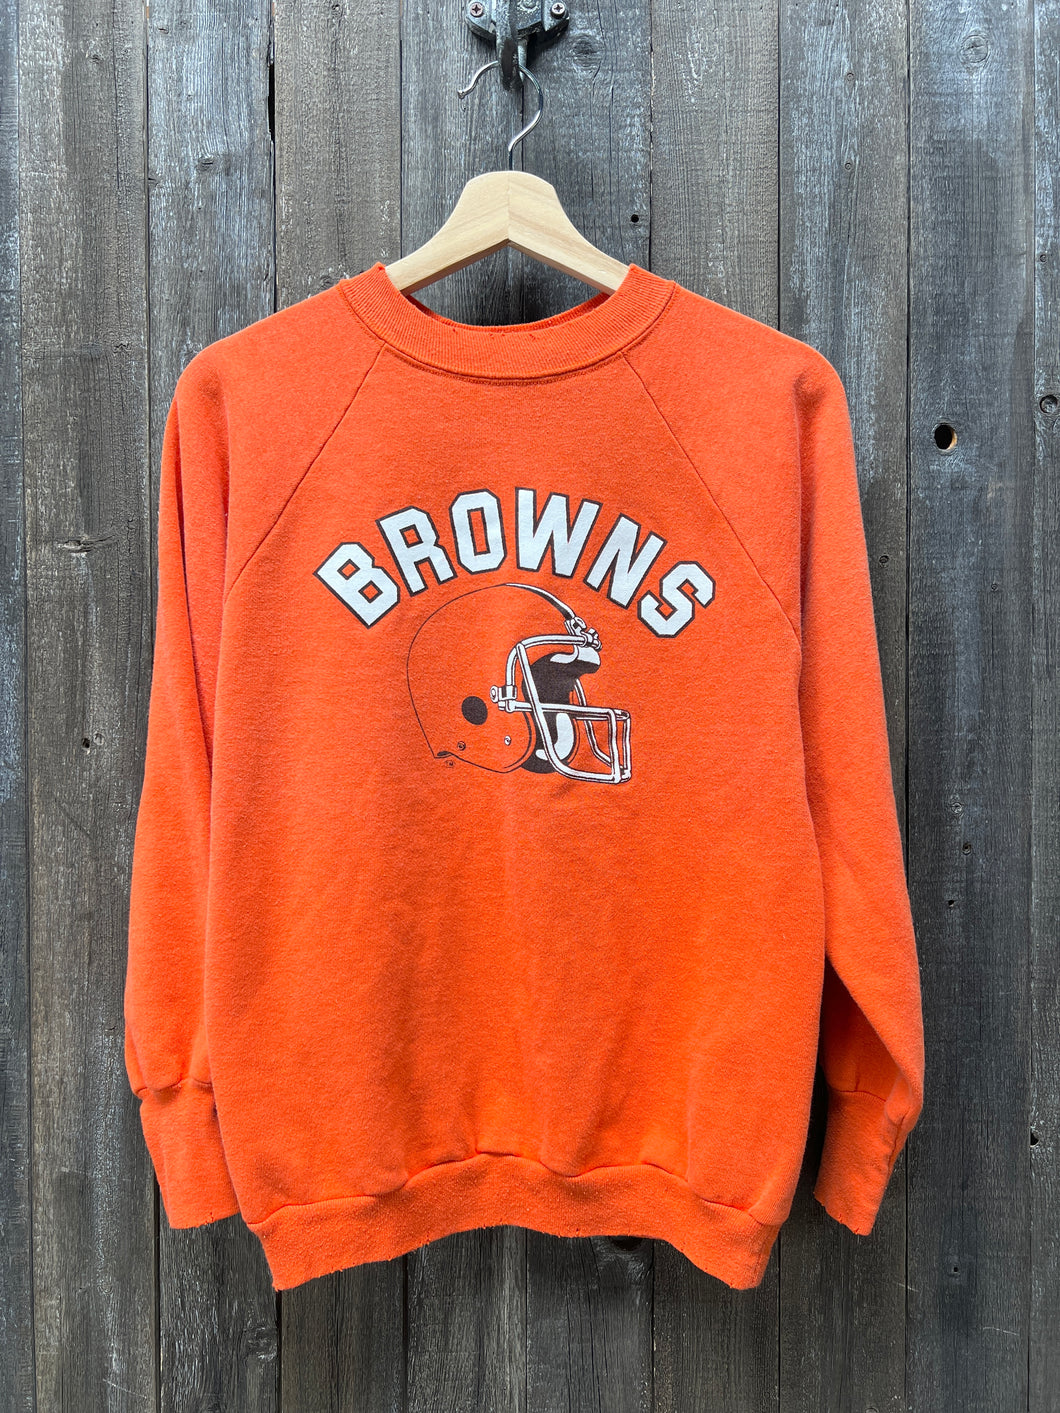 Browns Sweatshirt -S-Customize Your Embroidery Wording